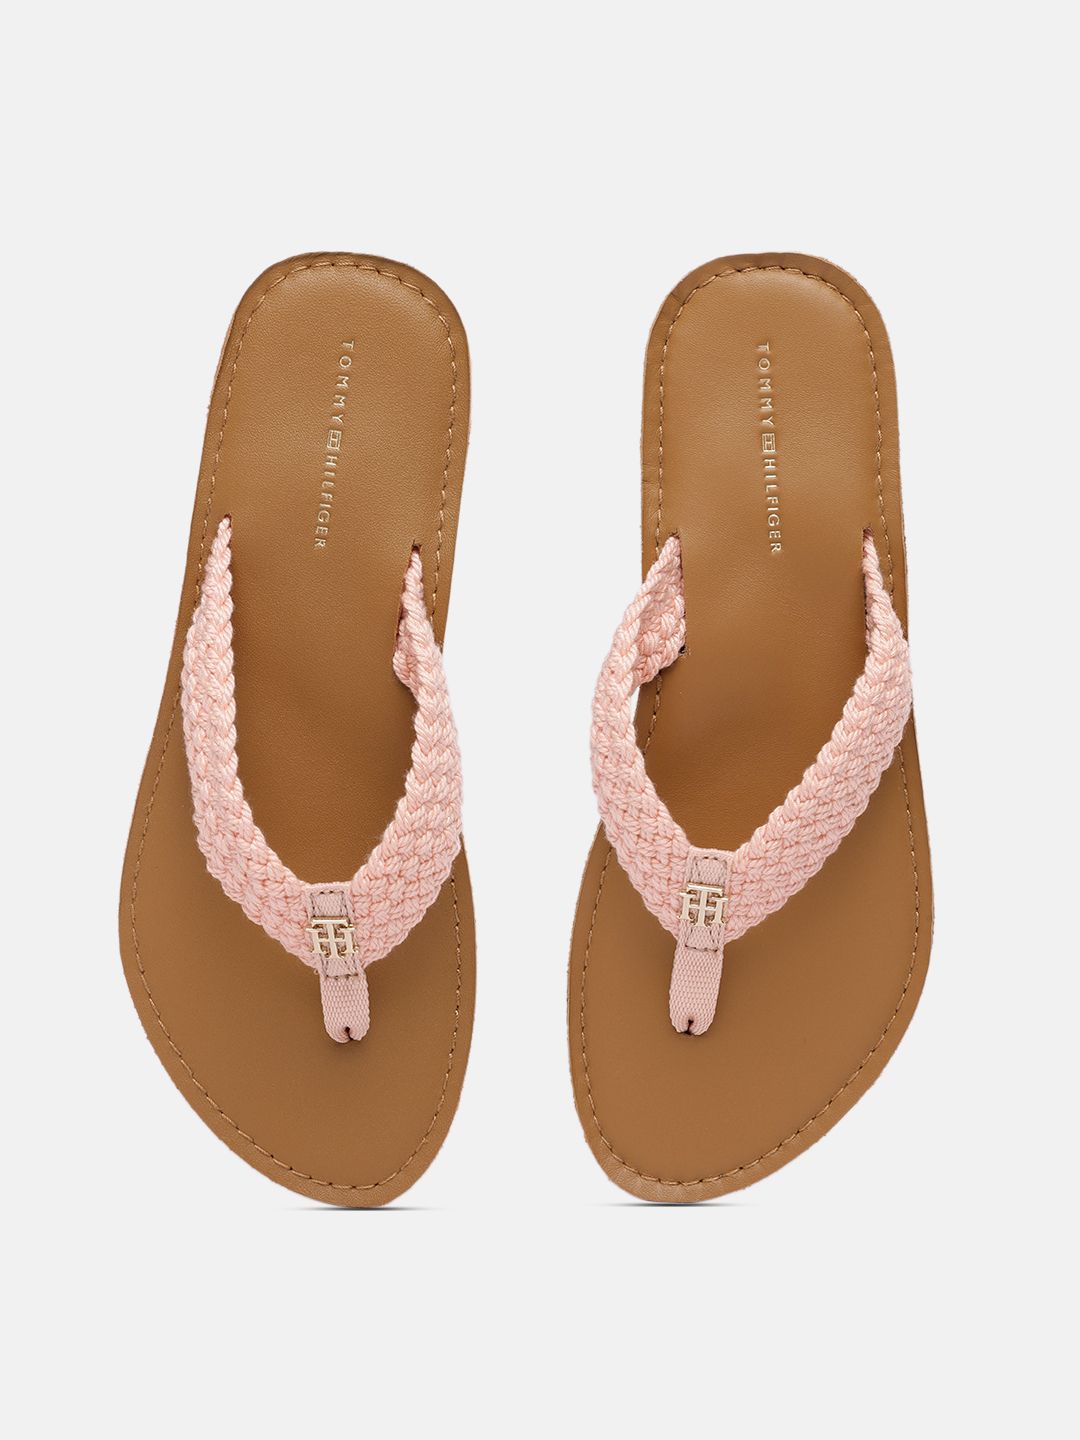 Tommy Hilfiger Women Pink Woven Design Thong Flip-Flops Price in India